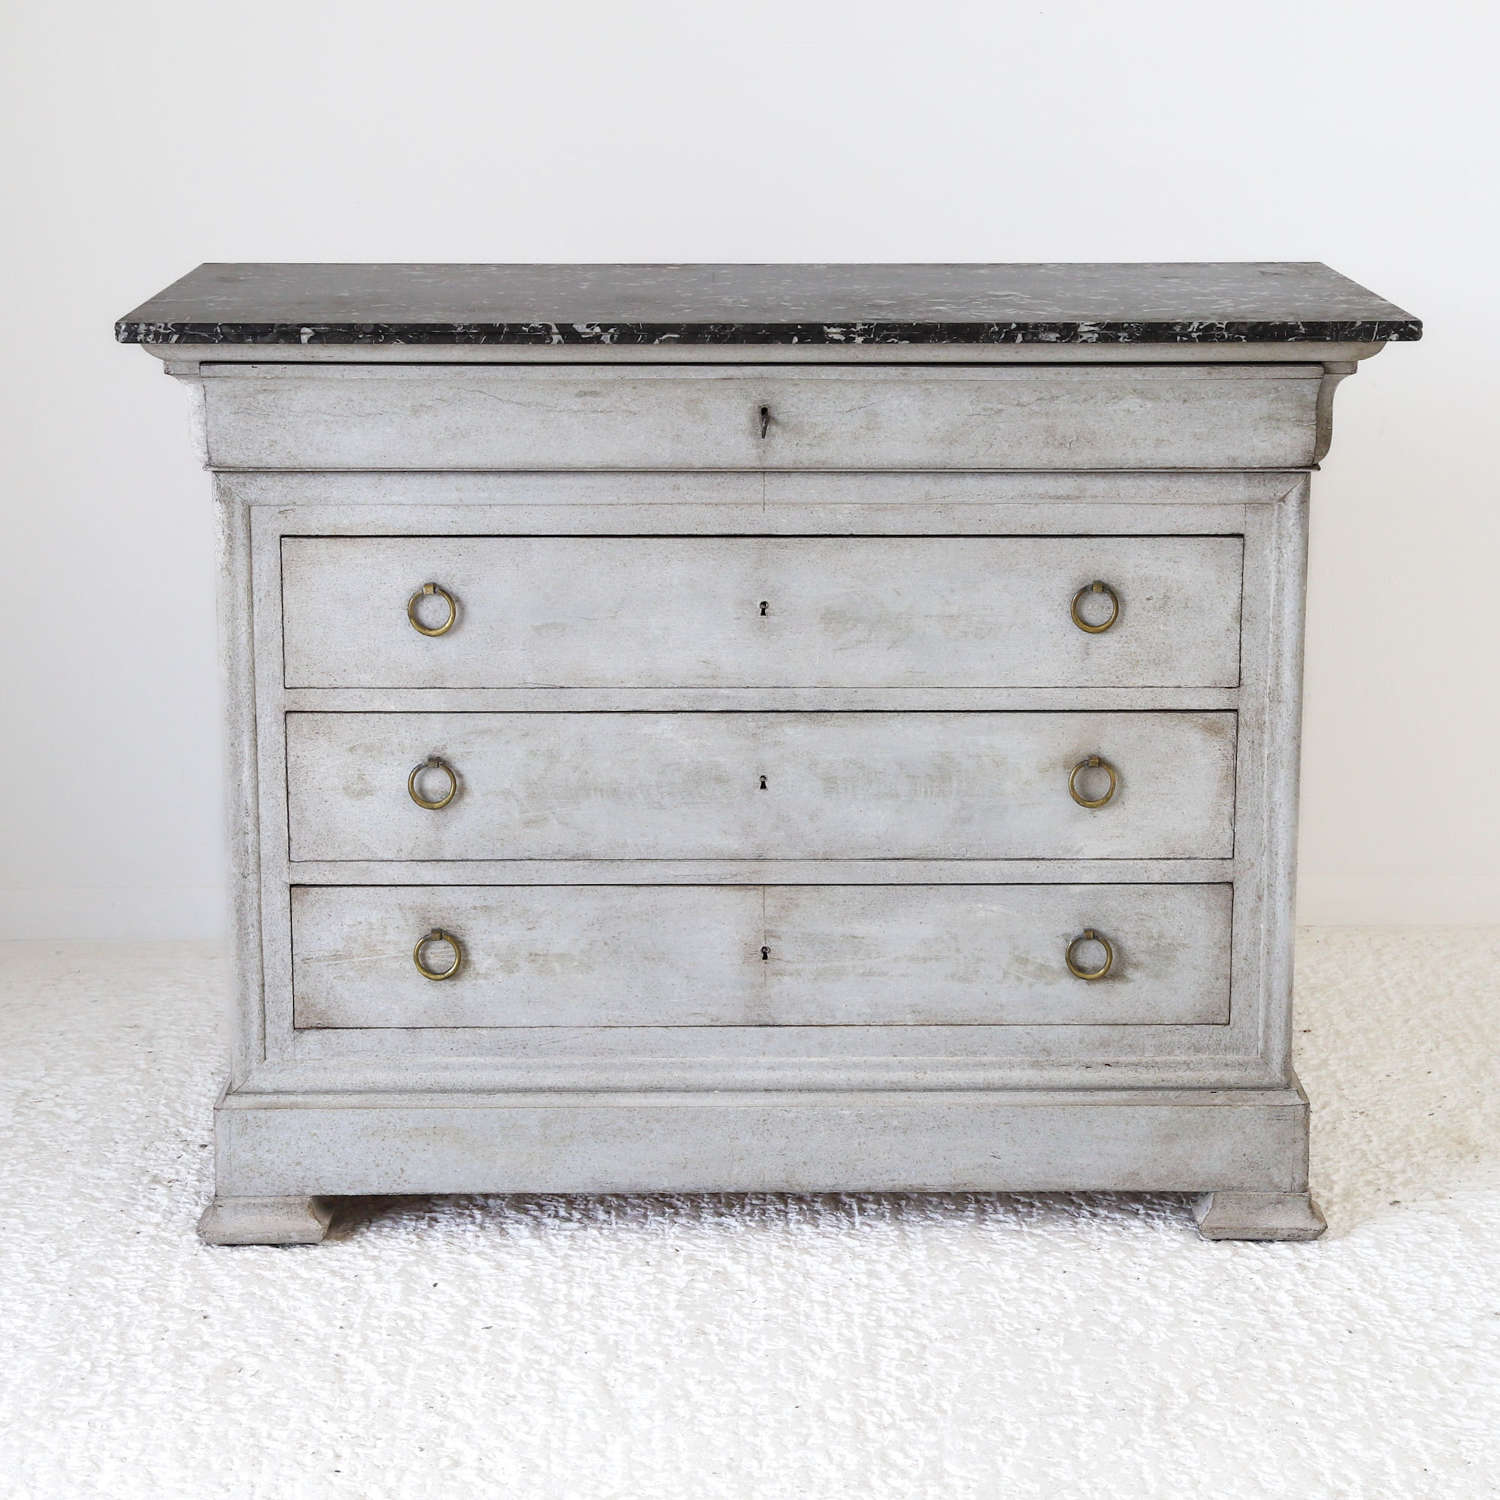 Circa 1900 French Commode with original Marble Top